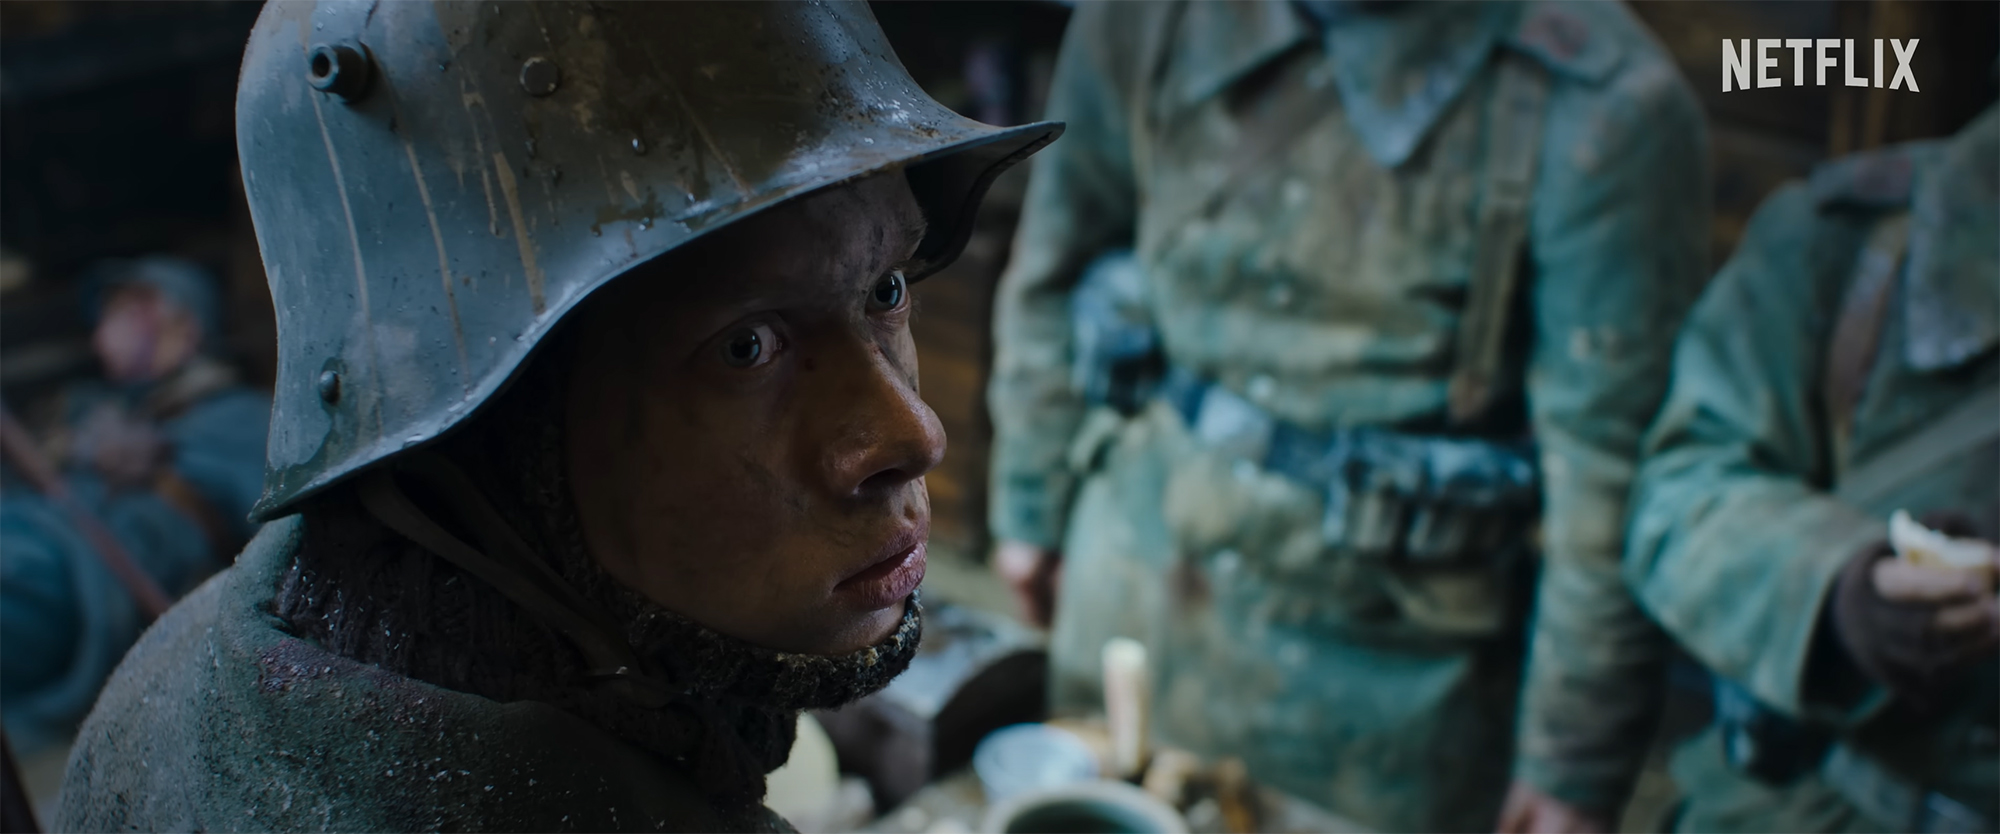 Film still depicting a young white man looking up and over his shoulder while wearing a round steel helmet